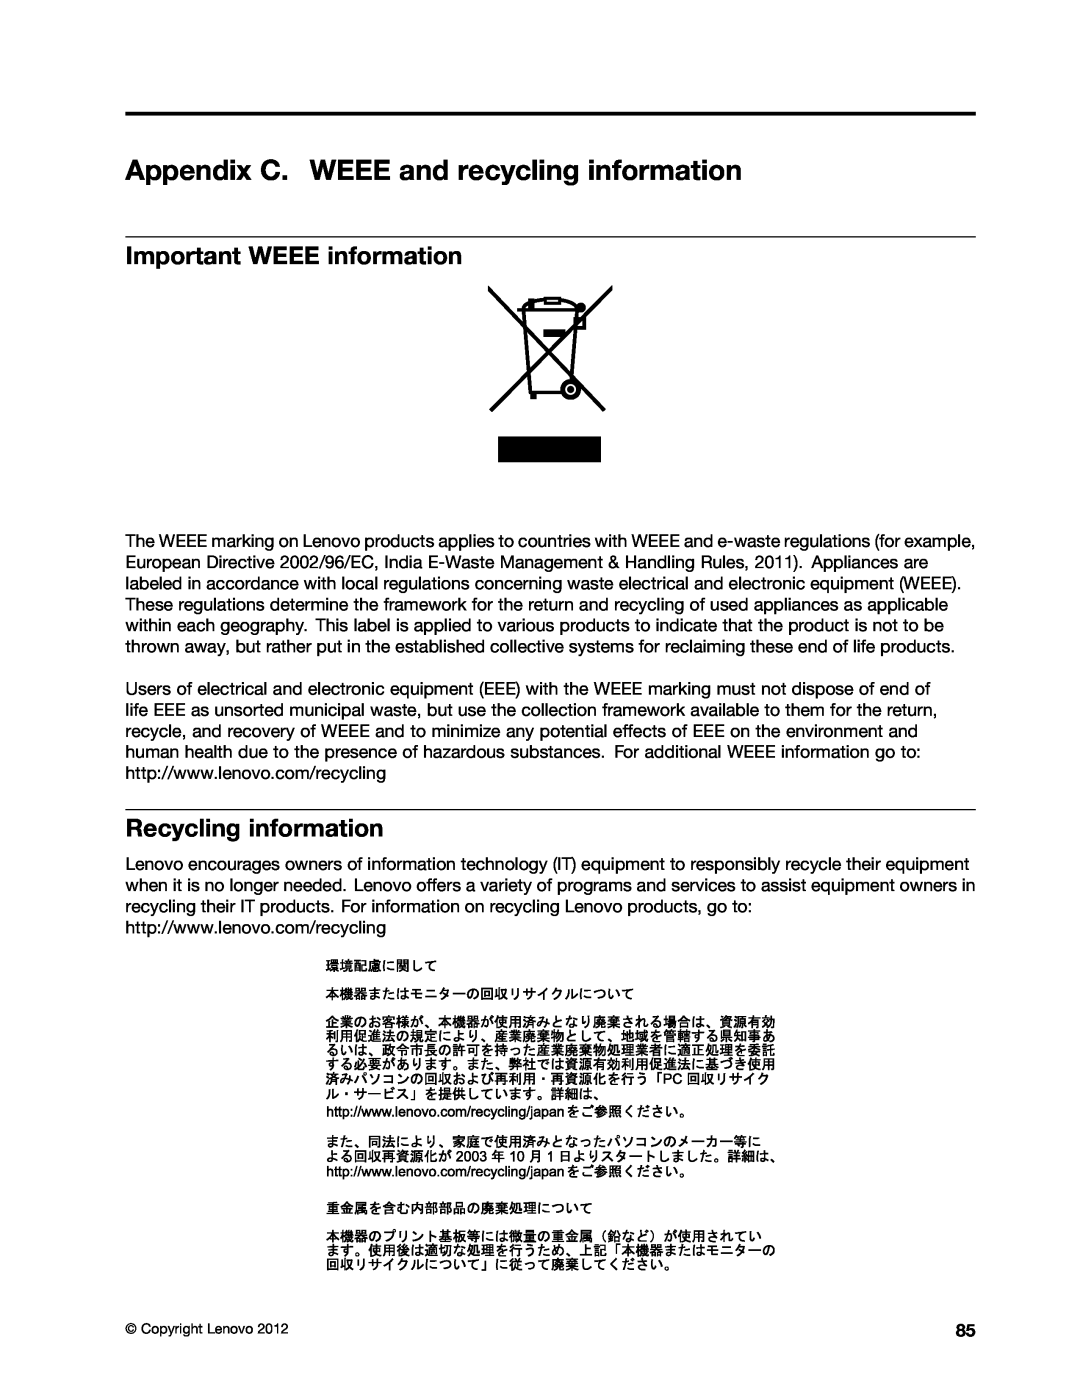 Lenovo 3397, 3398, 3399, 3414 Appendix C. WEEE and recycling information, Important WEEE information, Recycling information 